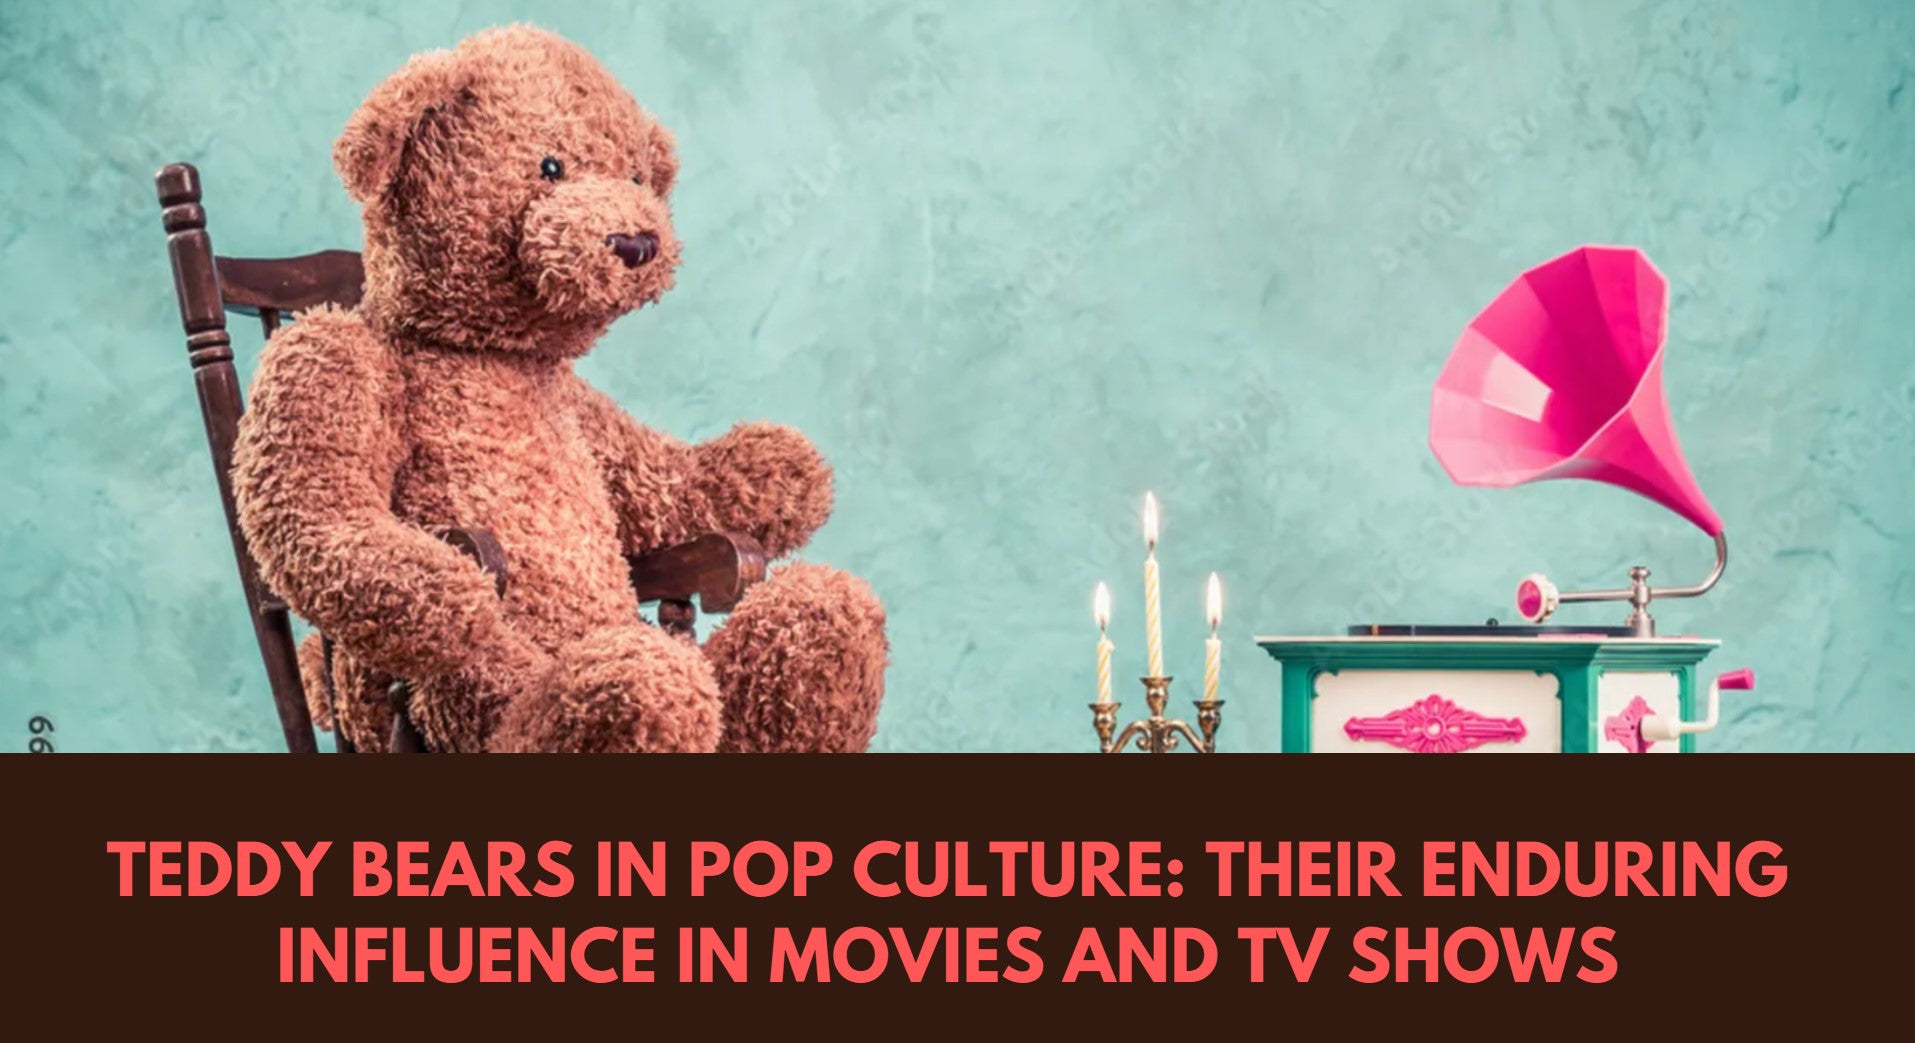 Teddy Bears in Pop Culture: Their Enduring Influence in Movies and TV Shows